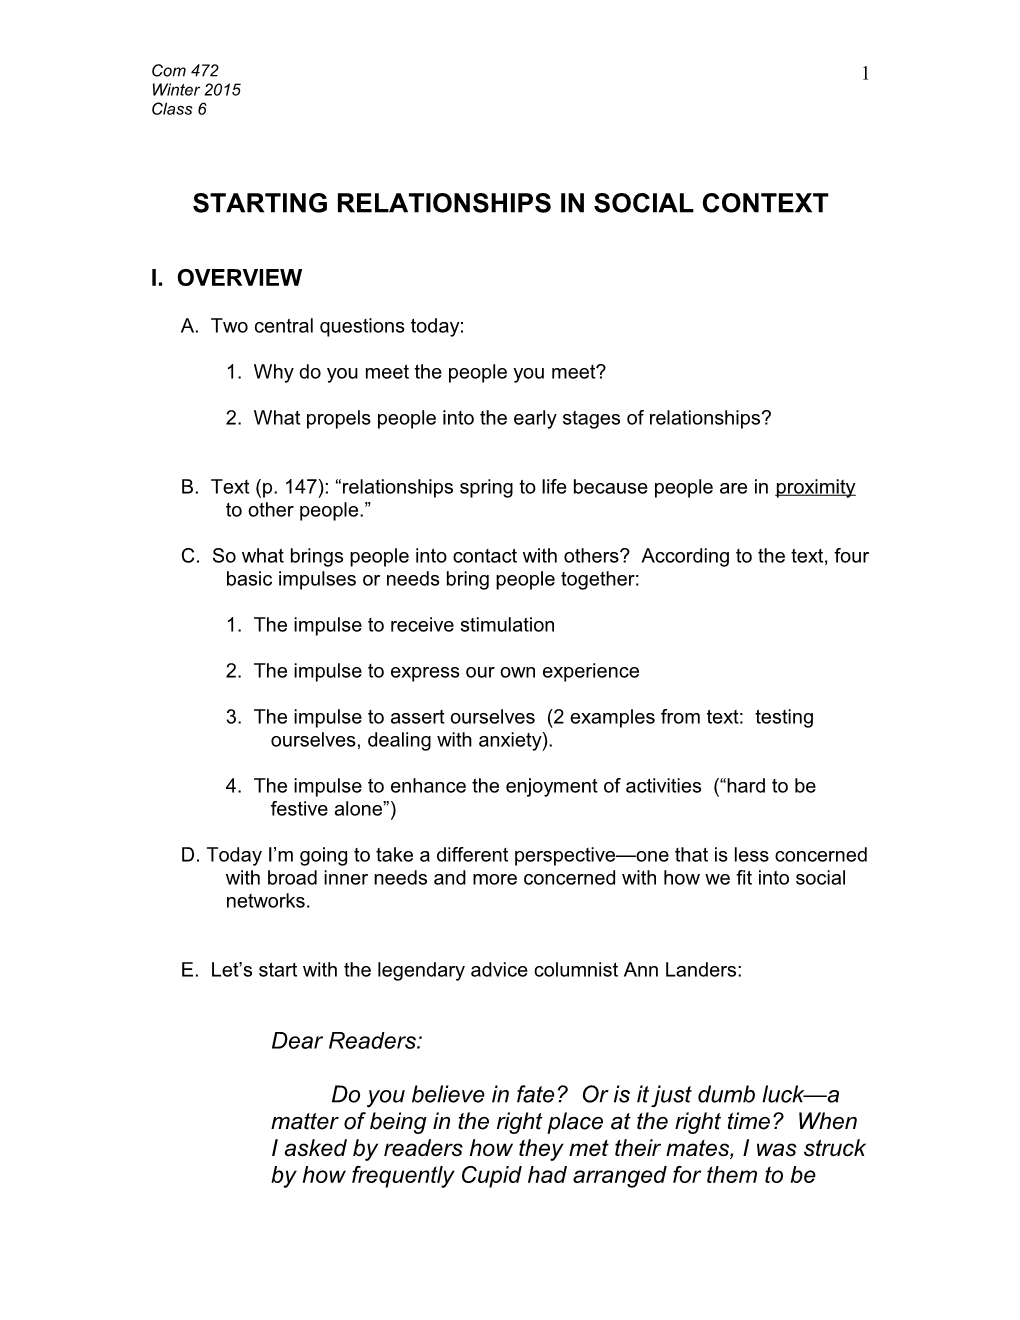 Starting Relationships in Social Context